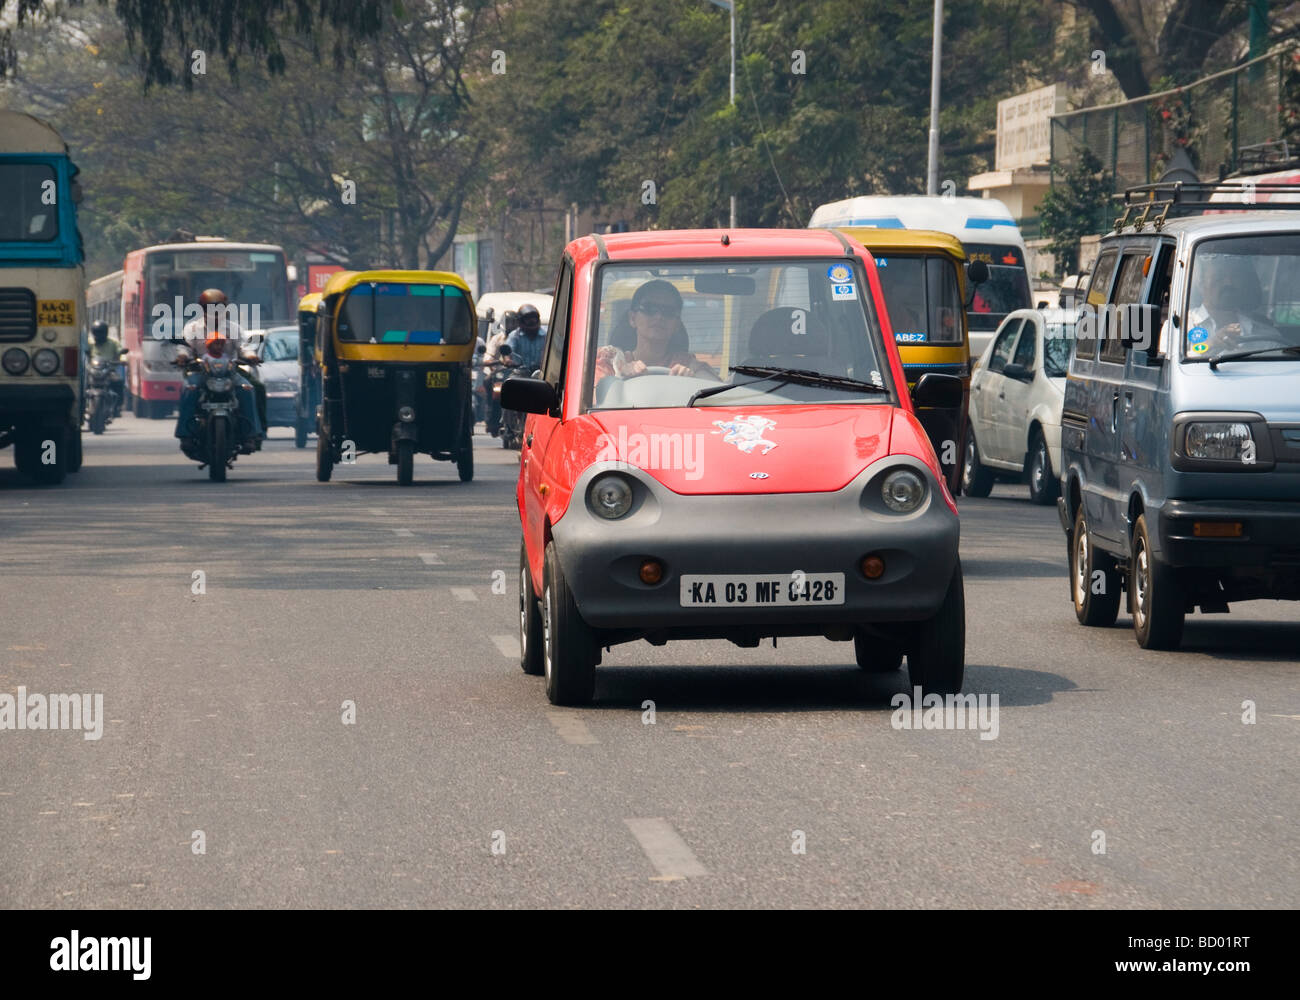 A Gwiz electric car in India Stock Photo